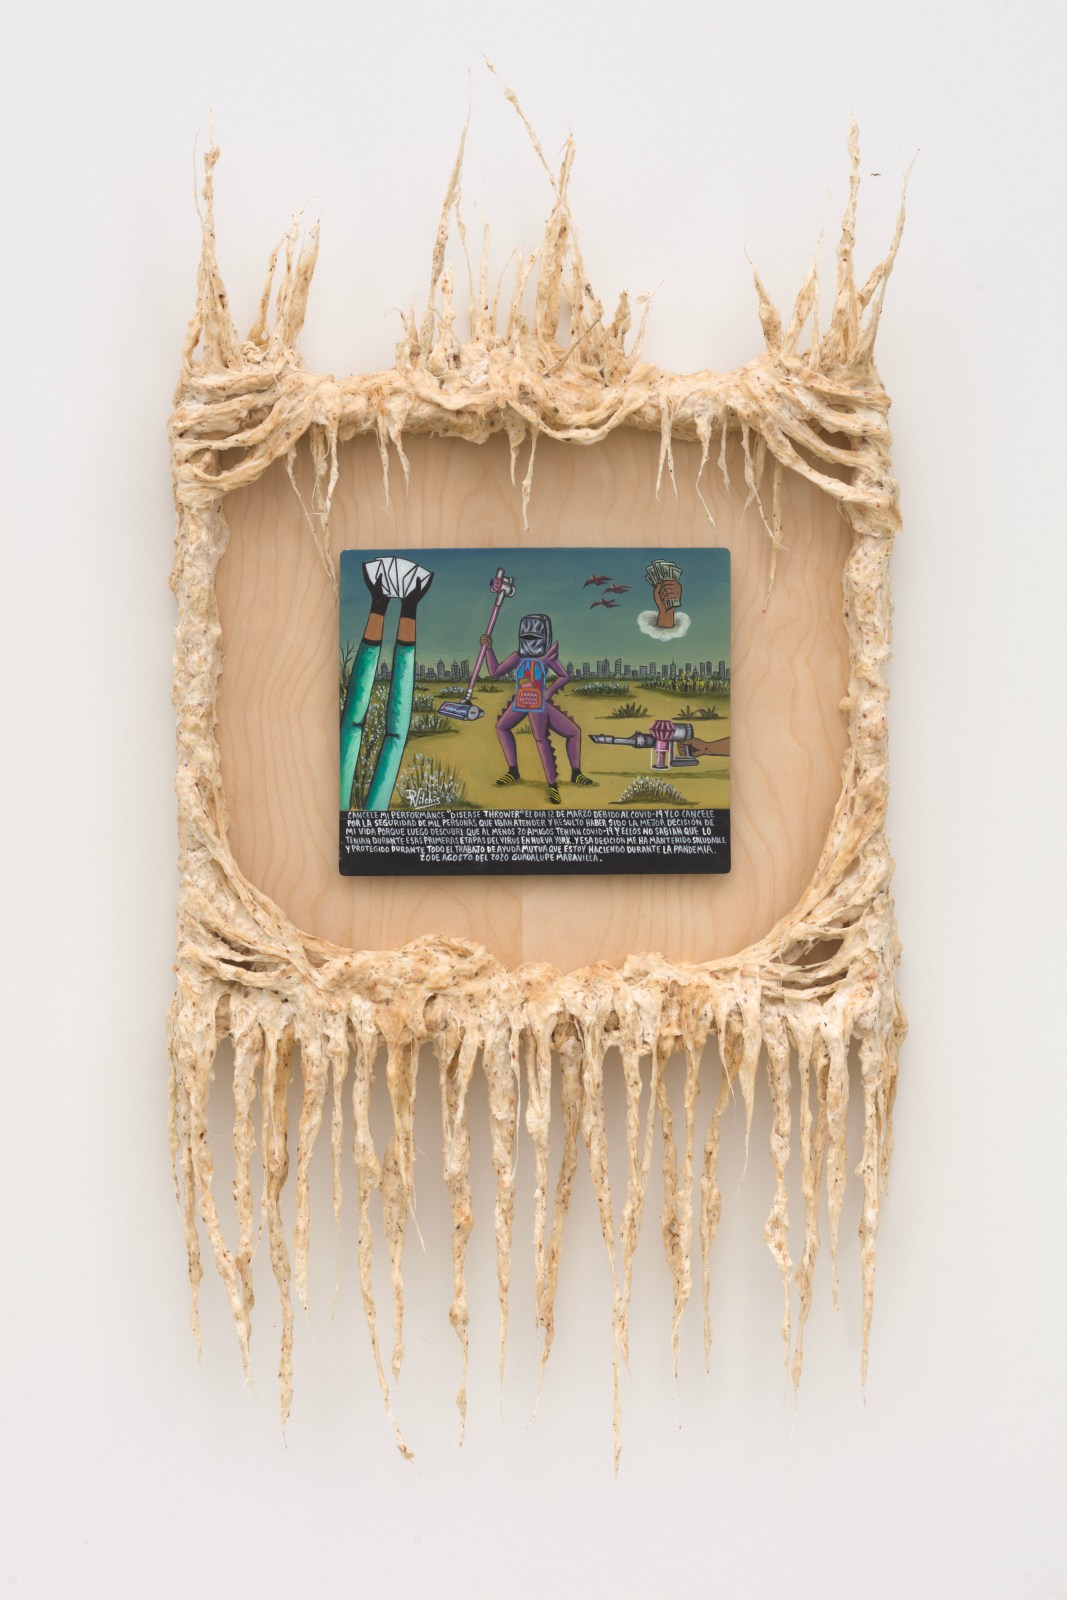 Guadalupe Maravilla - Seven Ancestral Stomachs - Exhibitions - PPOW